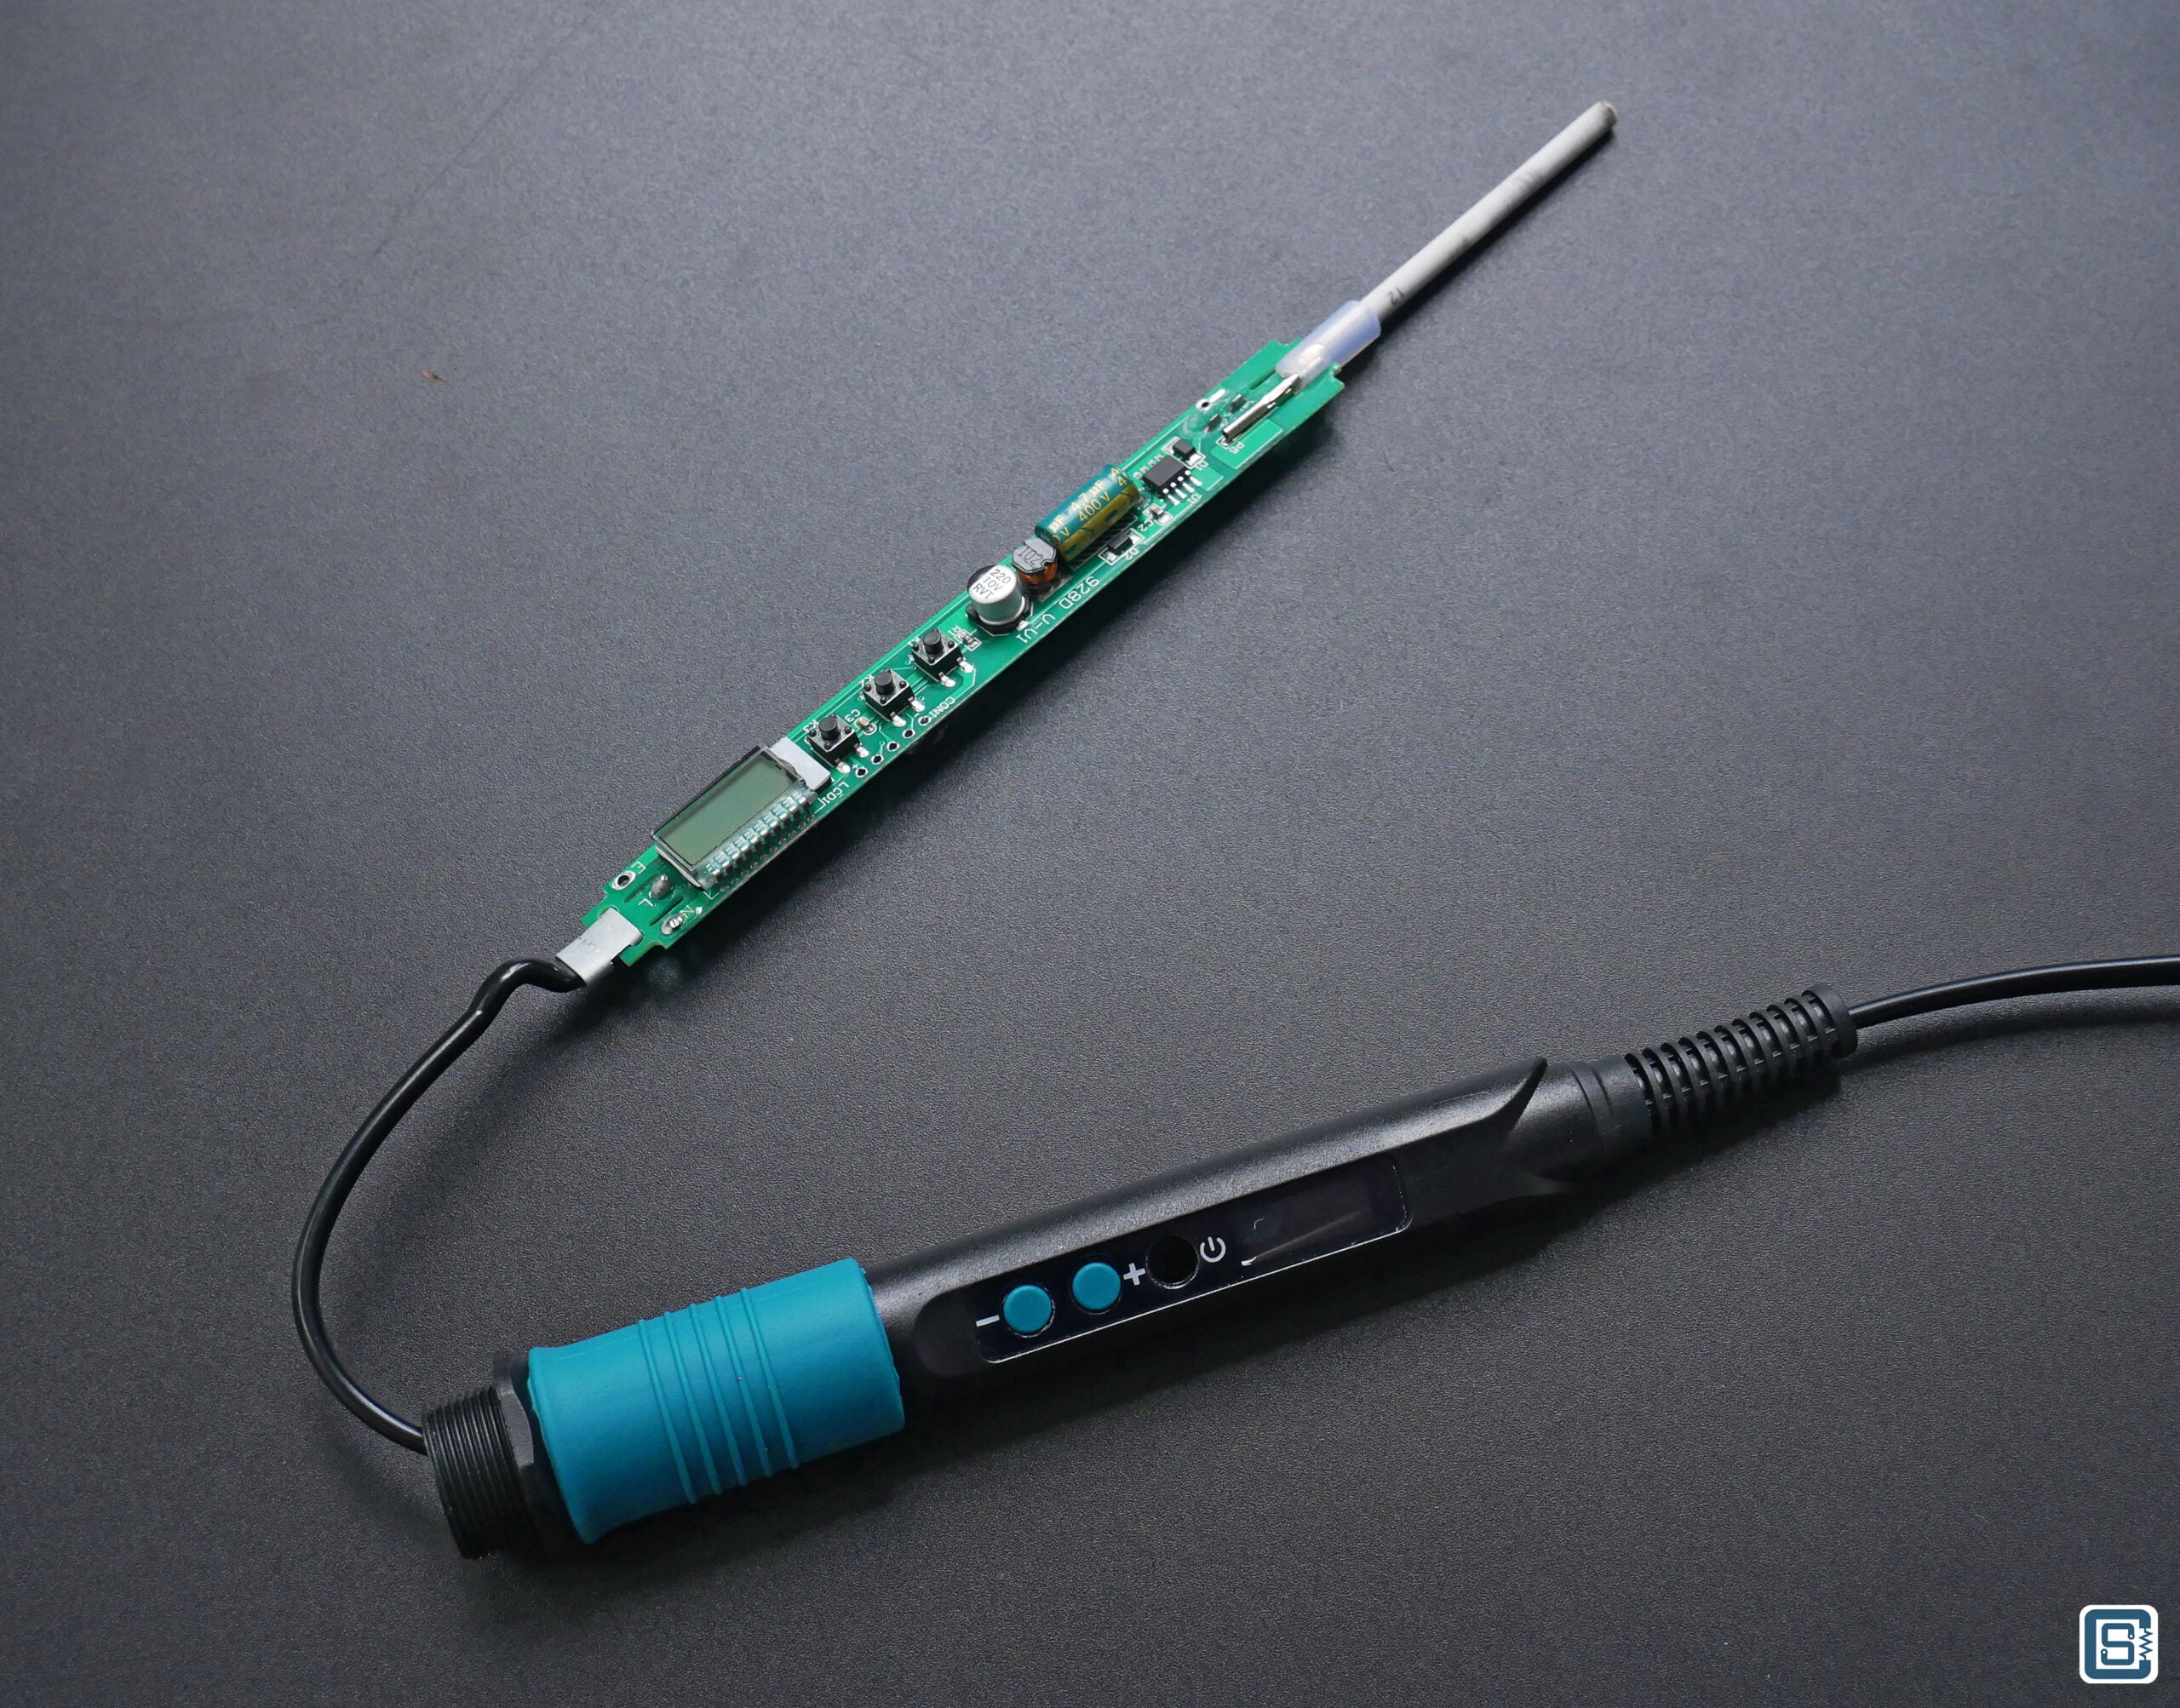 Noel-90W-Digital-Temperature-Controlled-Soldering-Iron-Revew-and-Teardown-Handle-and-PCB-CIRCUITSTATE-Electronics-2